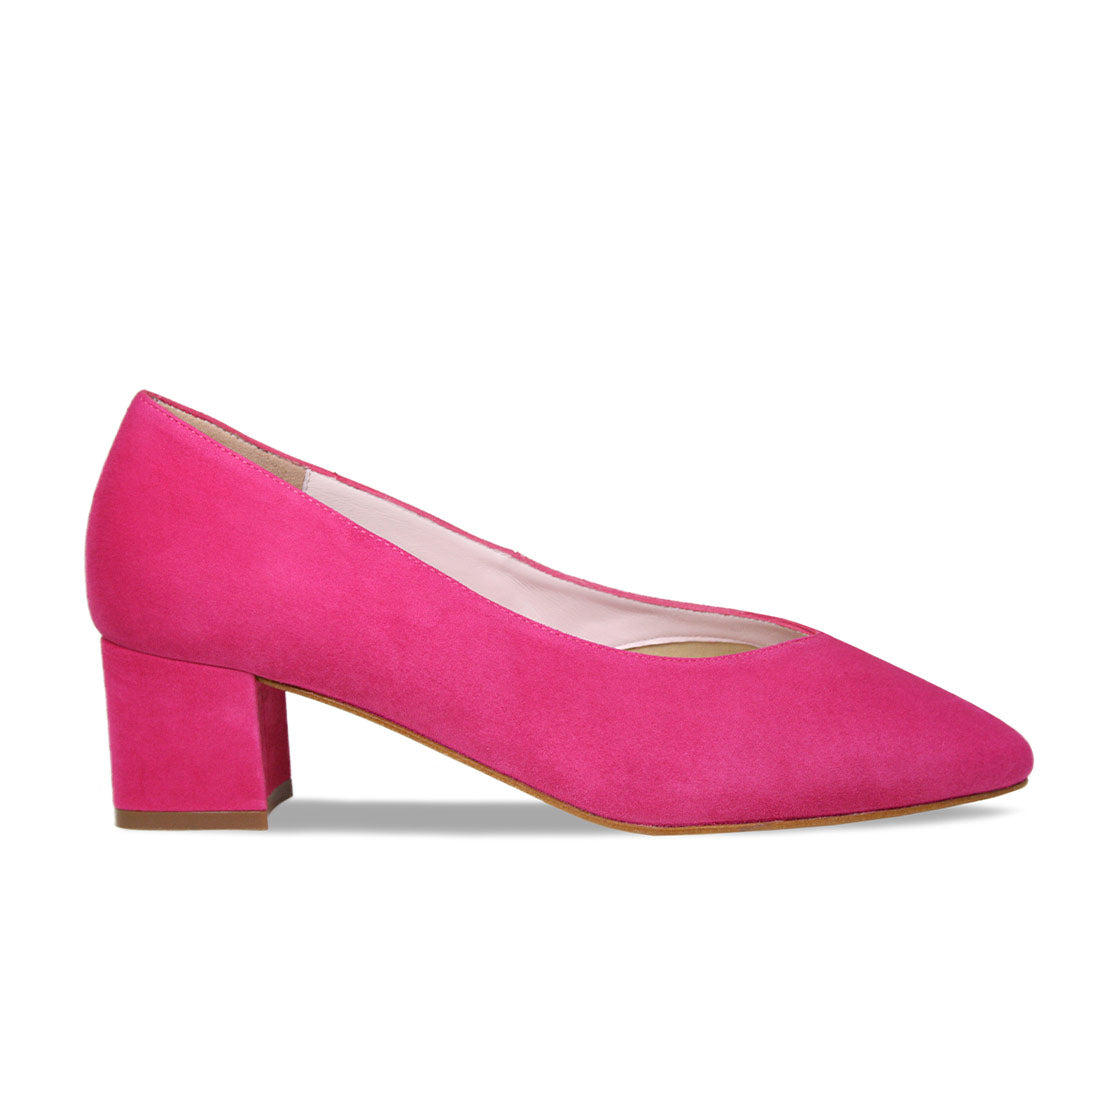 Deep Pink Colorful Peep Toe Stiletto Heel Shoes For Comfortable Black  Dressing Shoes Materials Joining From Shenian, $24.05 | DHgate.Com